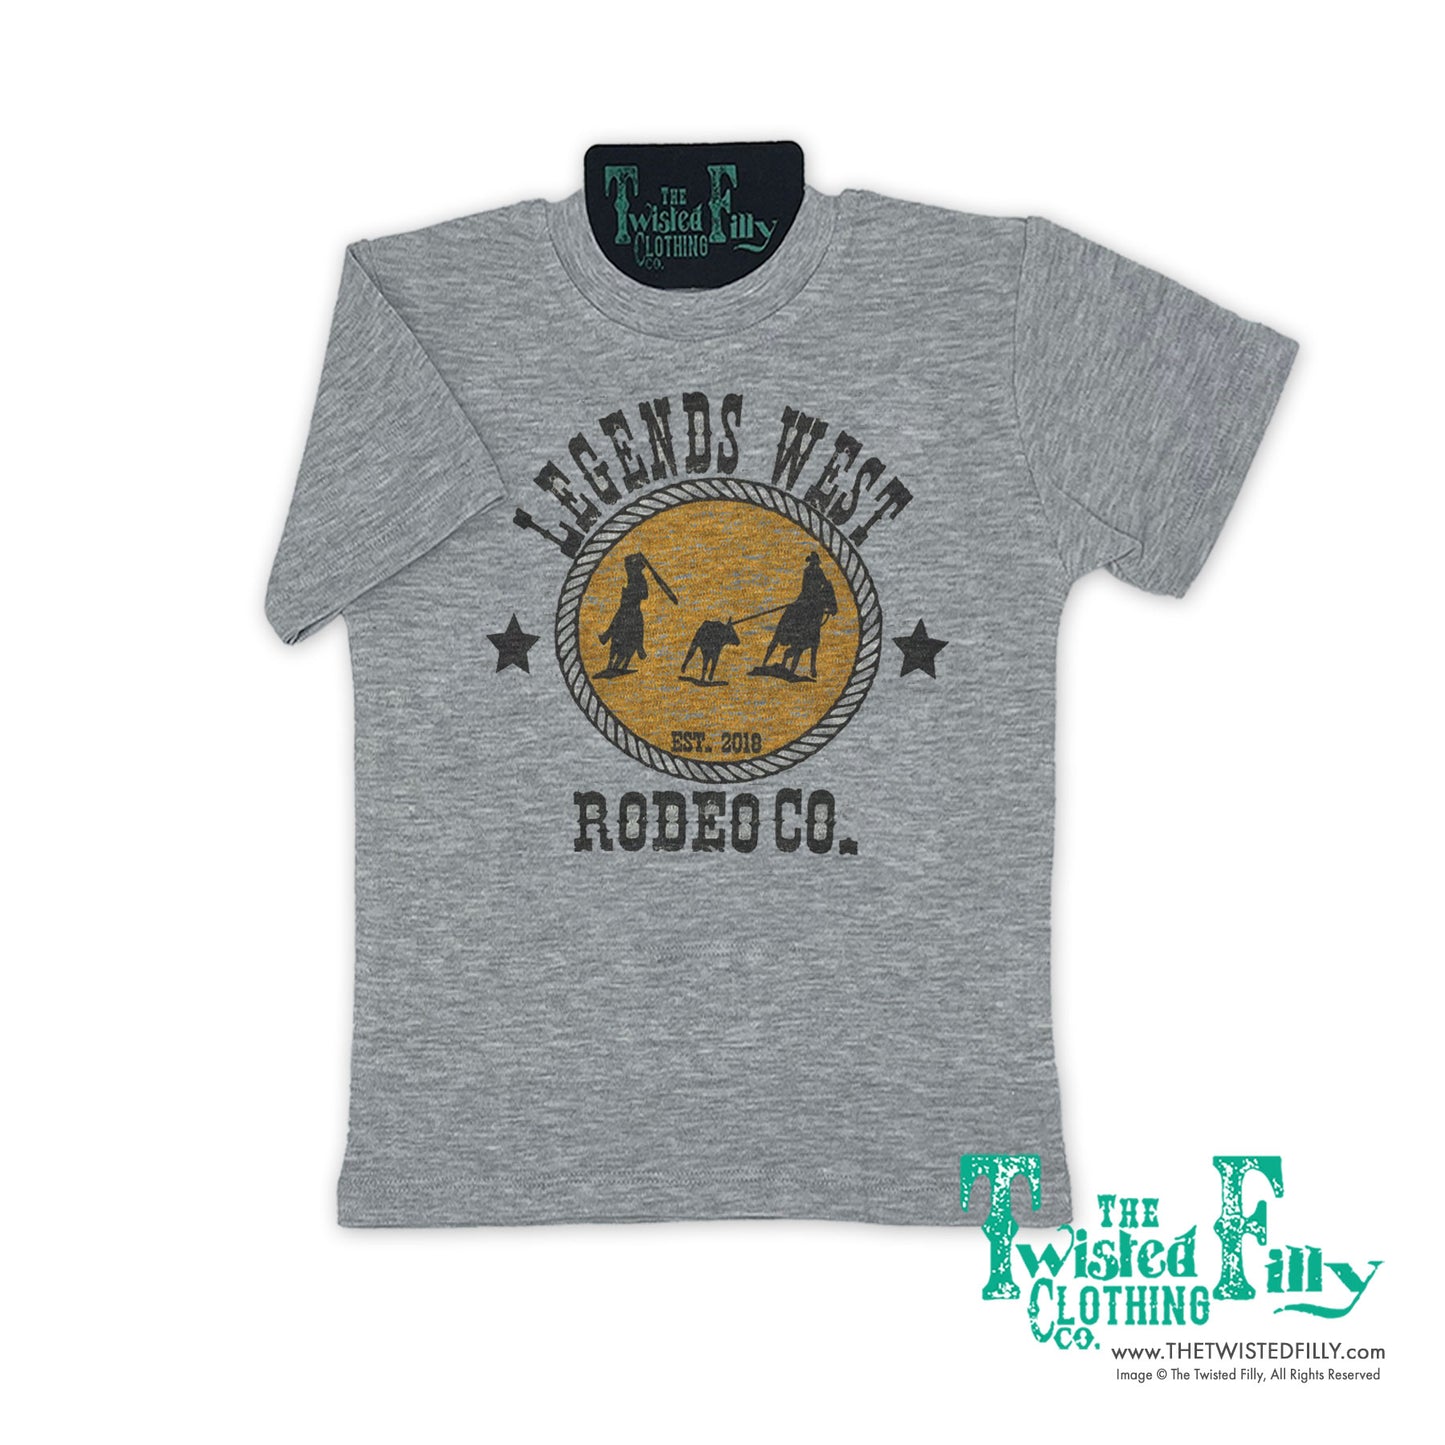 Legends West Rodeo Co. Team Roper - S/S Youth Tee - Gray